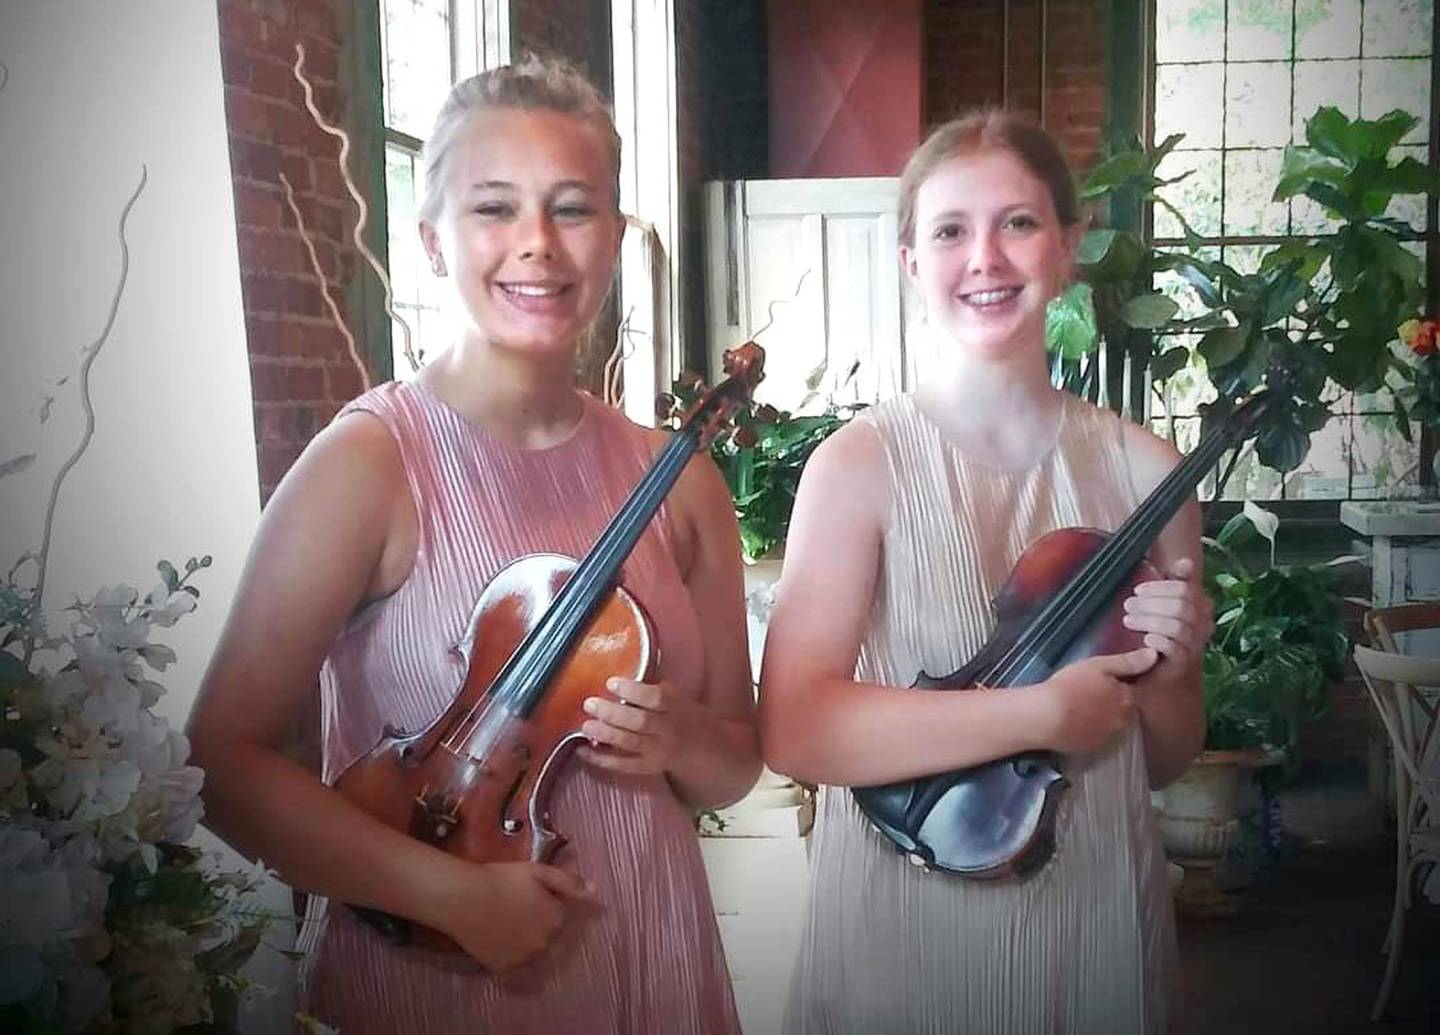 Emma Fredericks, 17, and Eva Peterson, 16, from Eva & Emma: Classical Duettes will perform at Lizzy's Pink Boutique on Friday, November 18 as a part of Moonlight Magic.